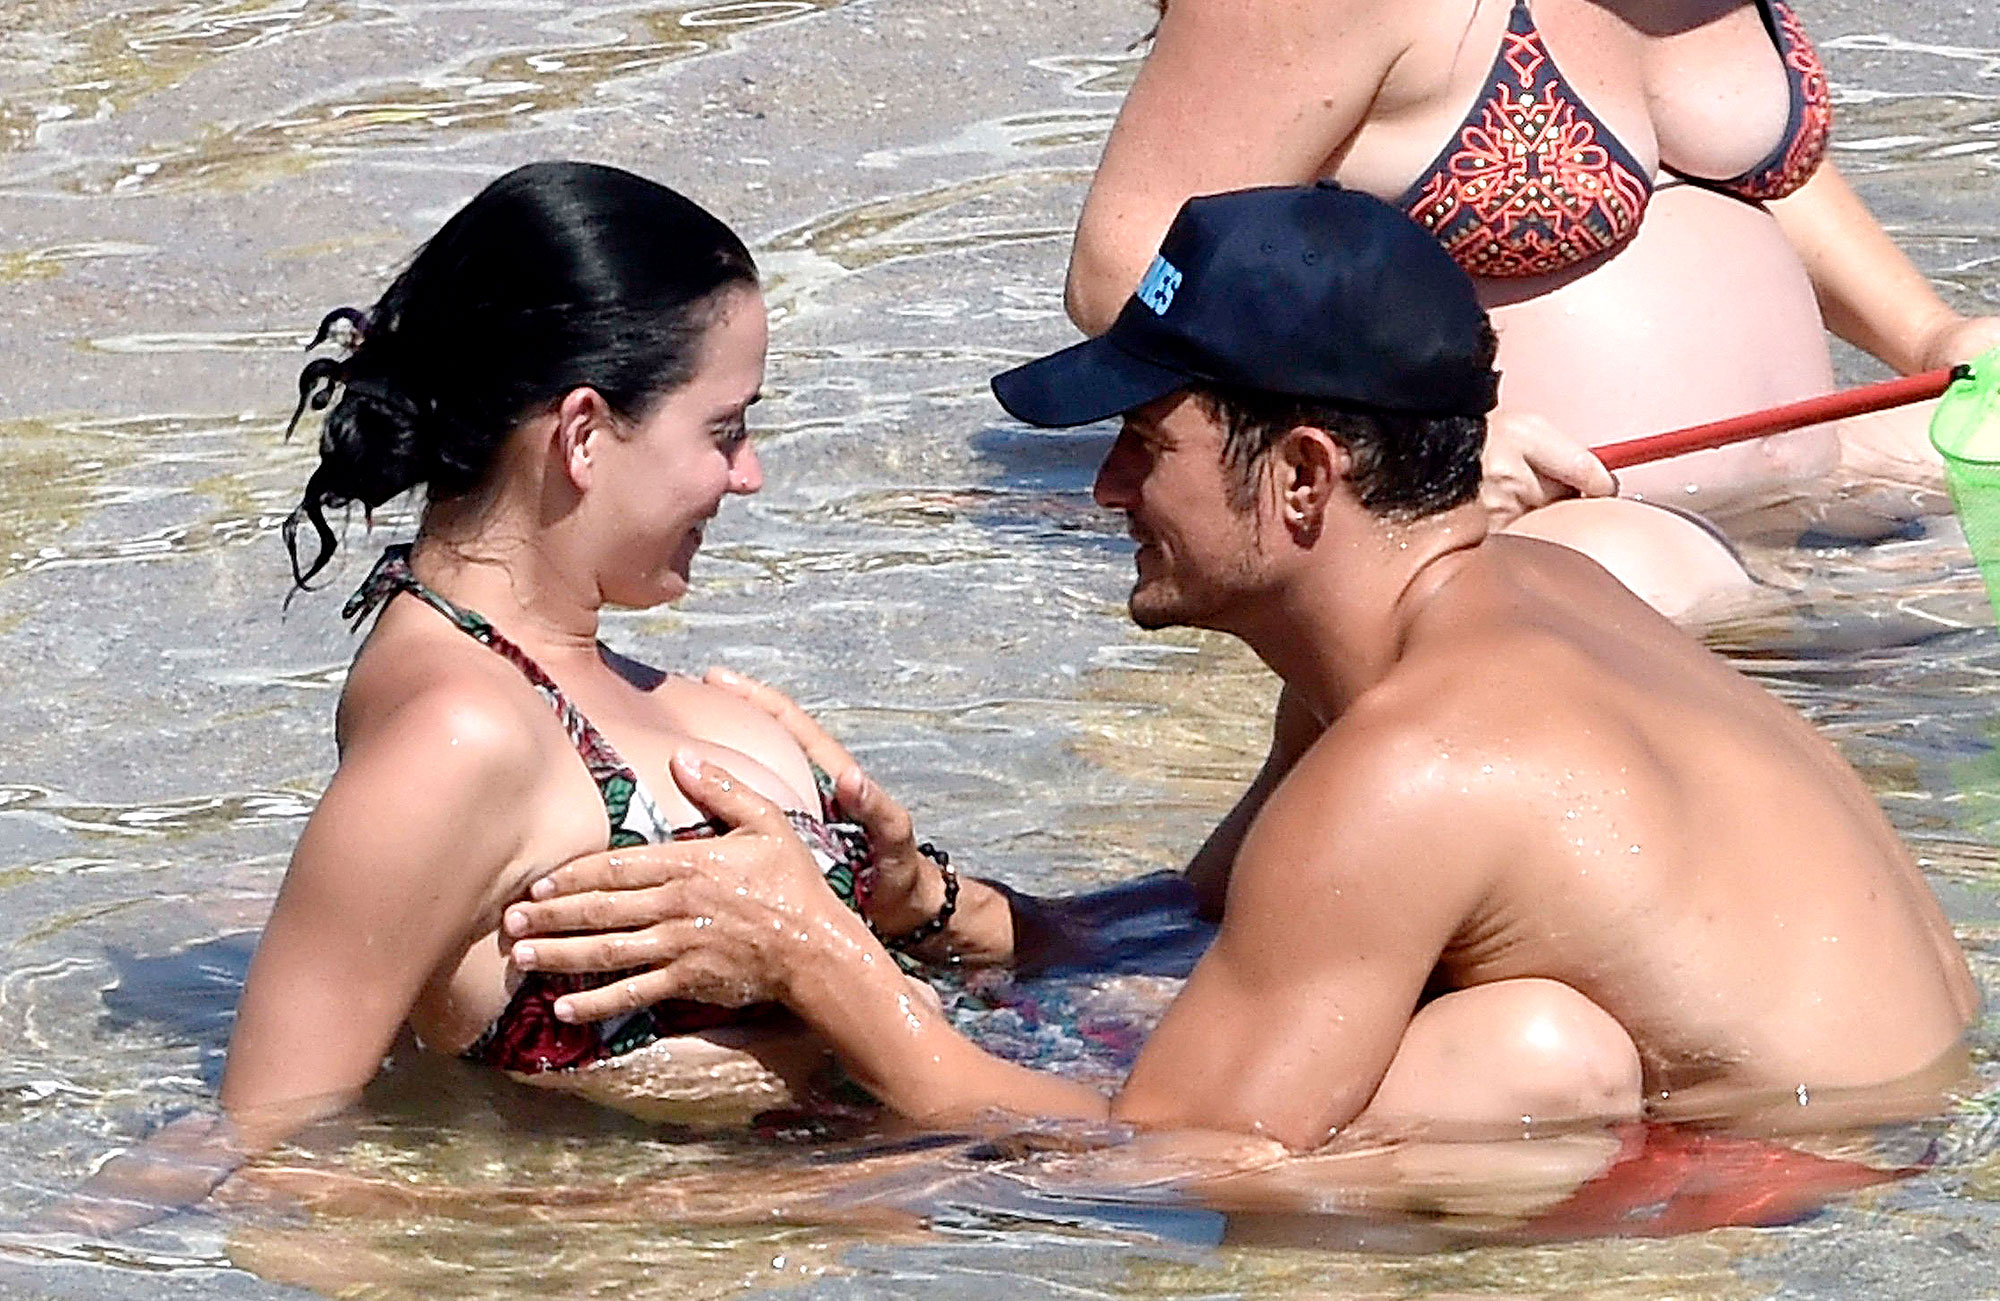 Couples Topless Beach Boobs - Orlando Bloom Grabs Katy Perry's Boobs During Beach Vacation